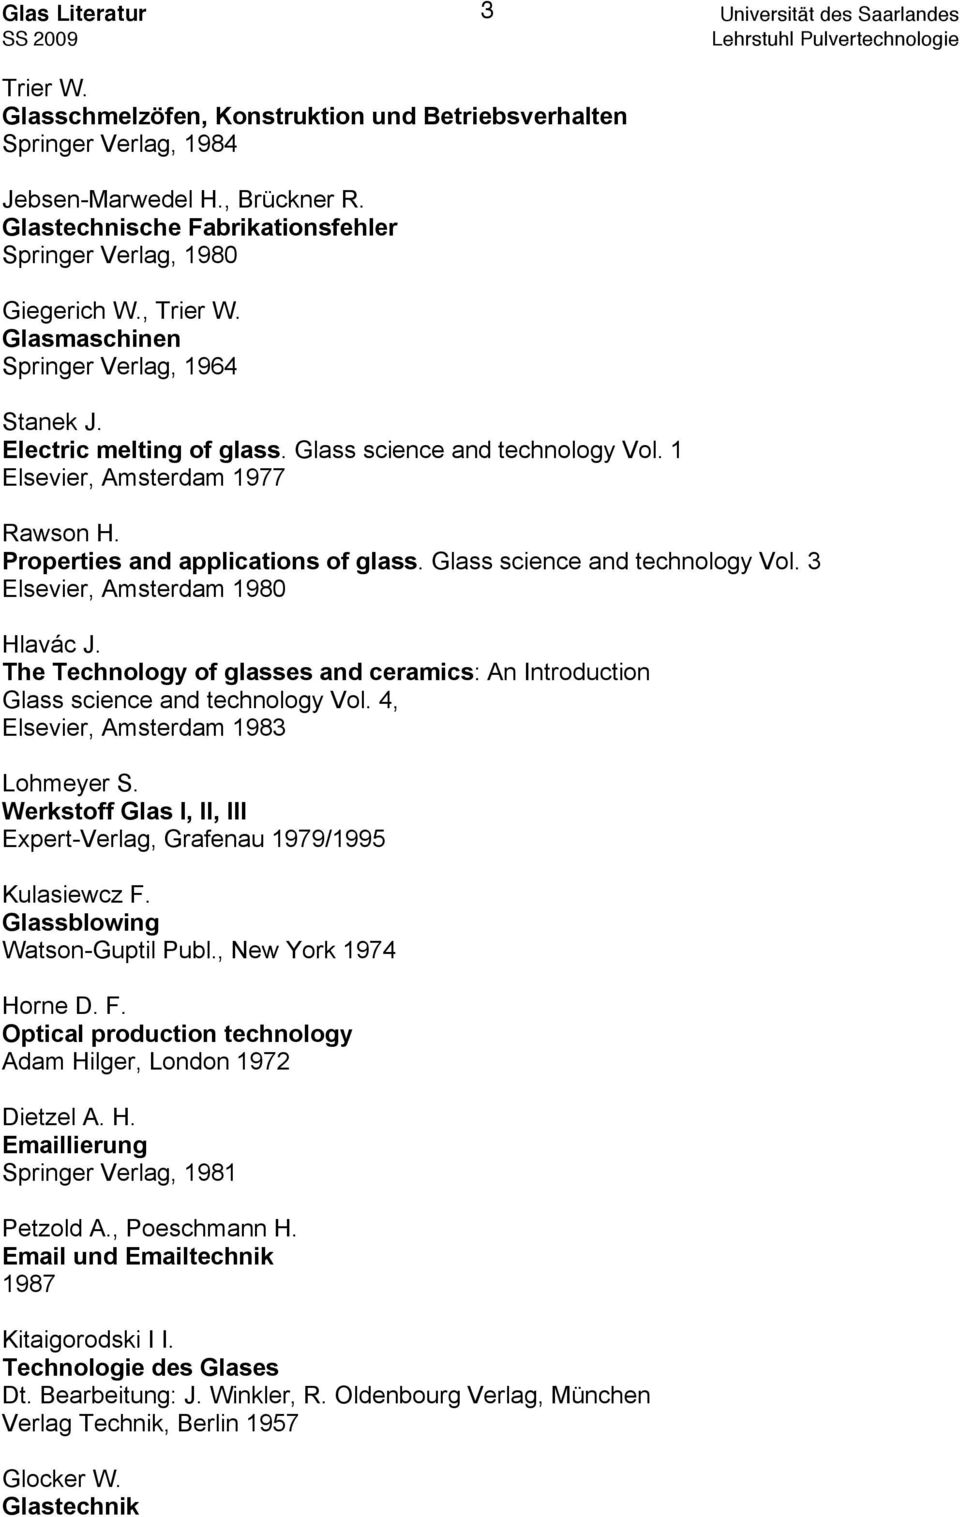 Glass science and technology Vol. 3 Elsevier, Amsterdam 1980 Hlavác J. The Technology of glasses and ceramics: An Introduction Glass science and technology Vol. 4, Elsevier, Amsterdam 1983 Lohmeyer S.